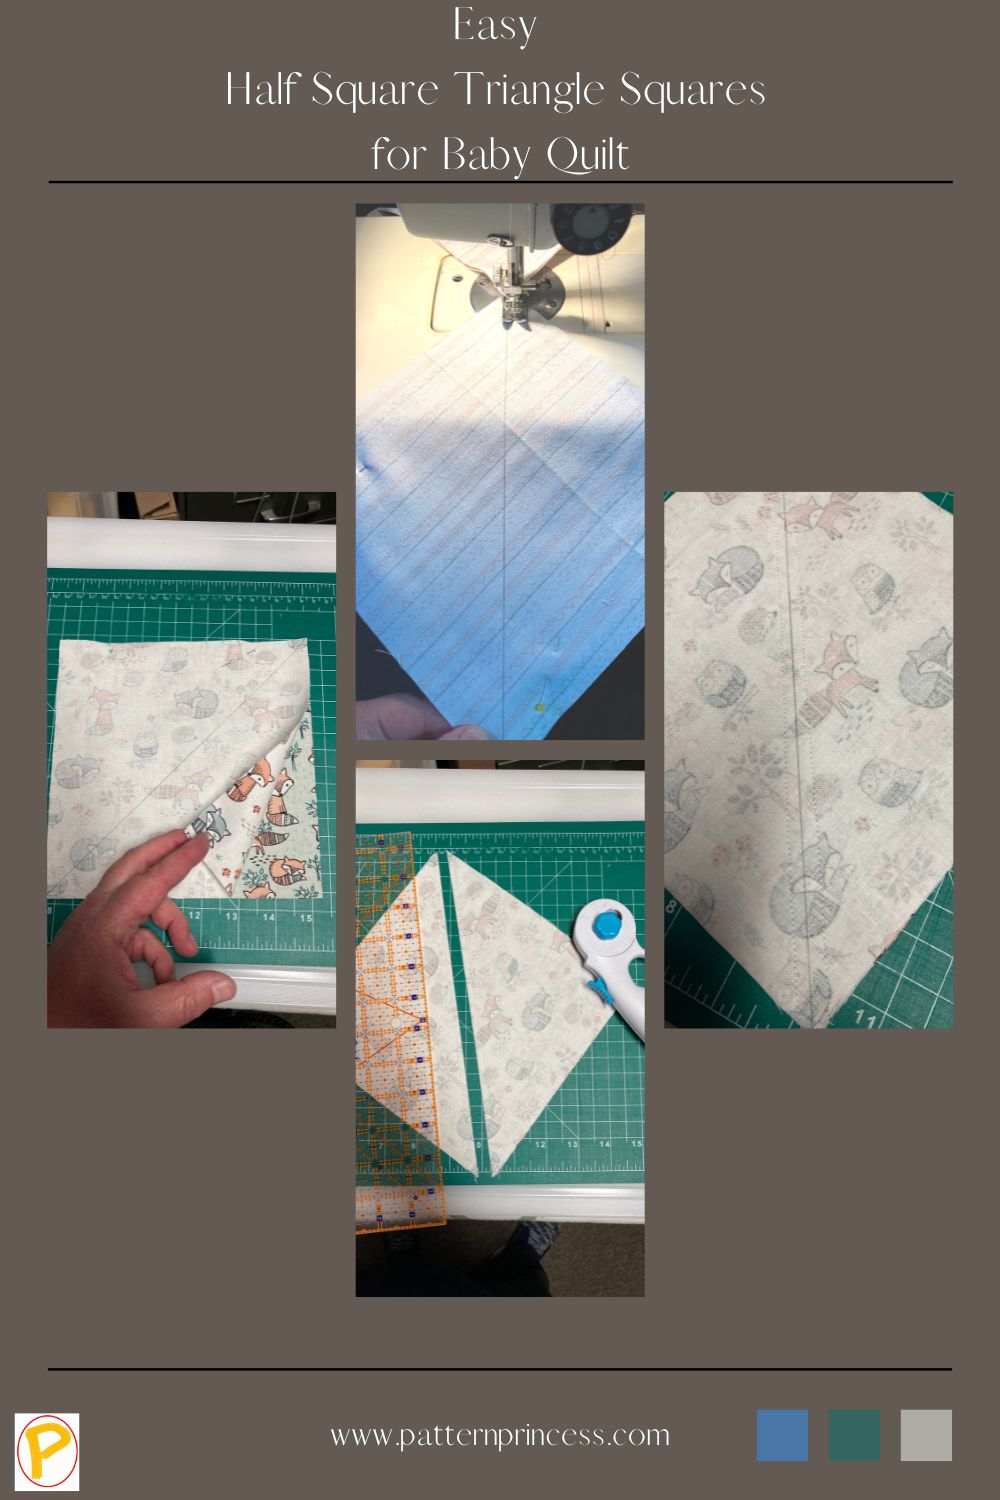 Easy Half Square Triangle Squares for Baby Quilt